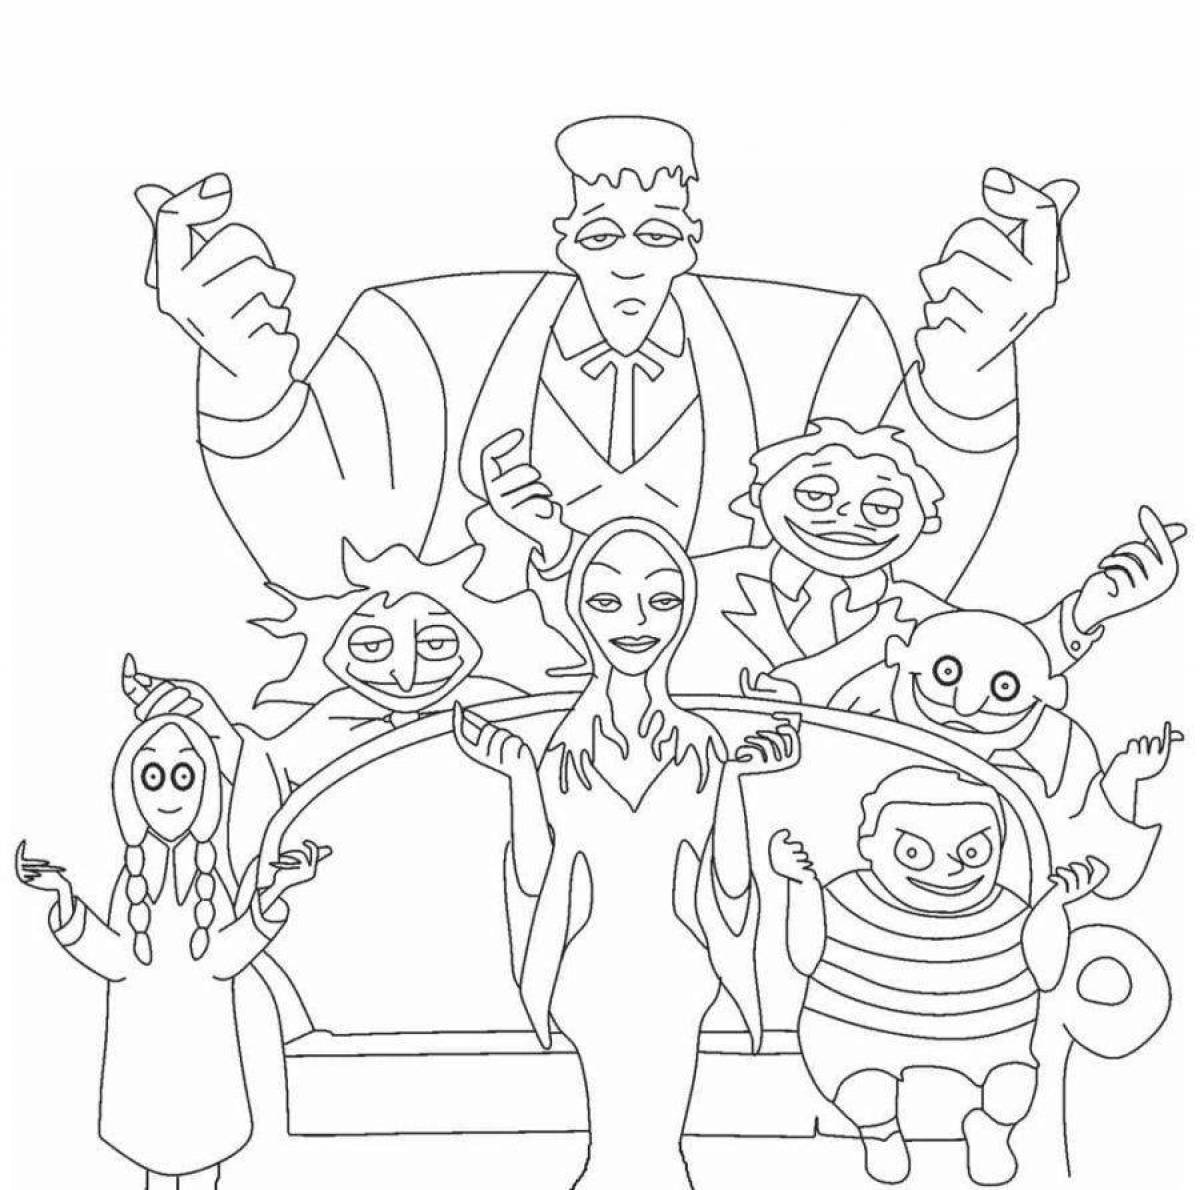 Sparkling wenday coloring page